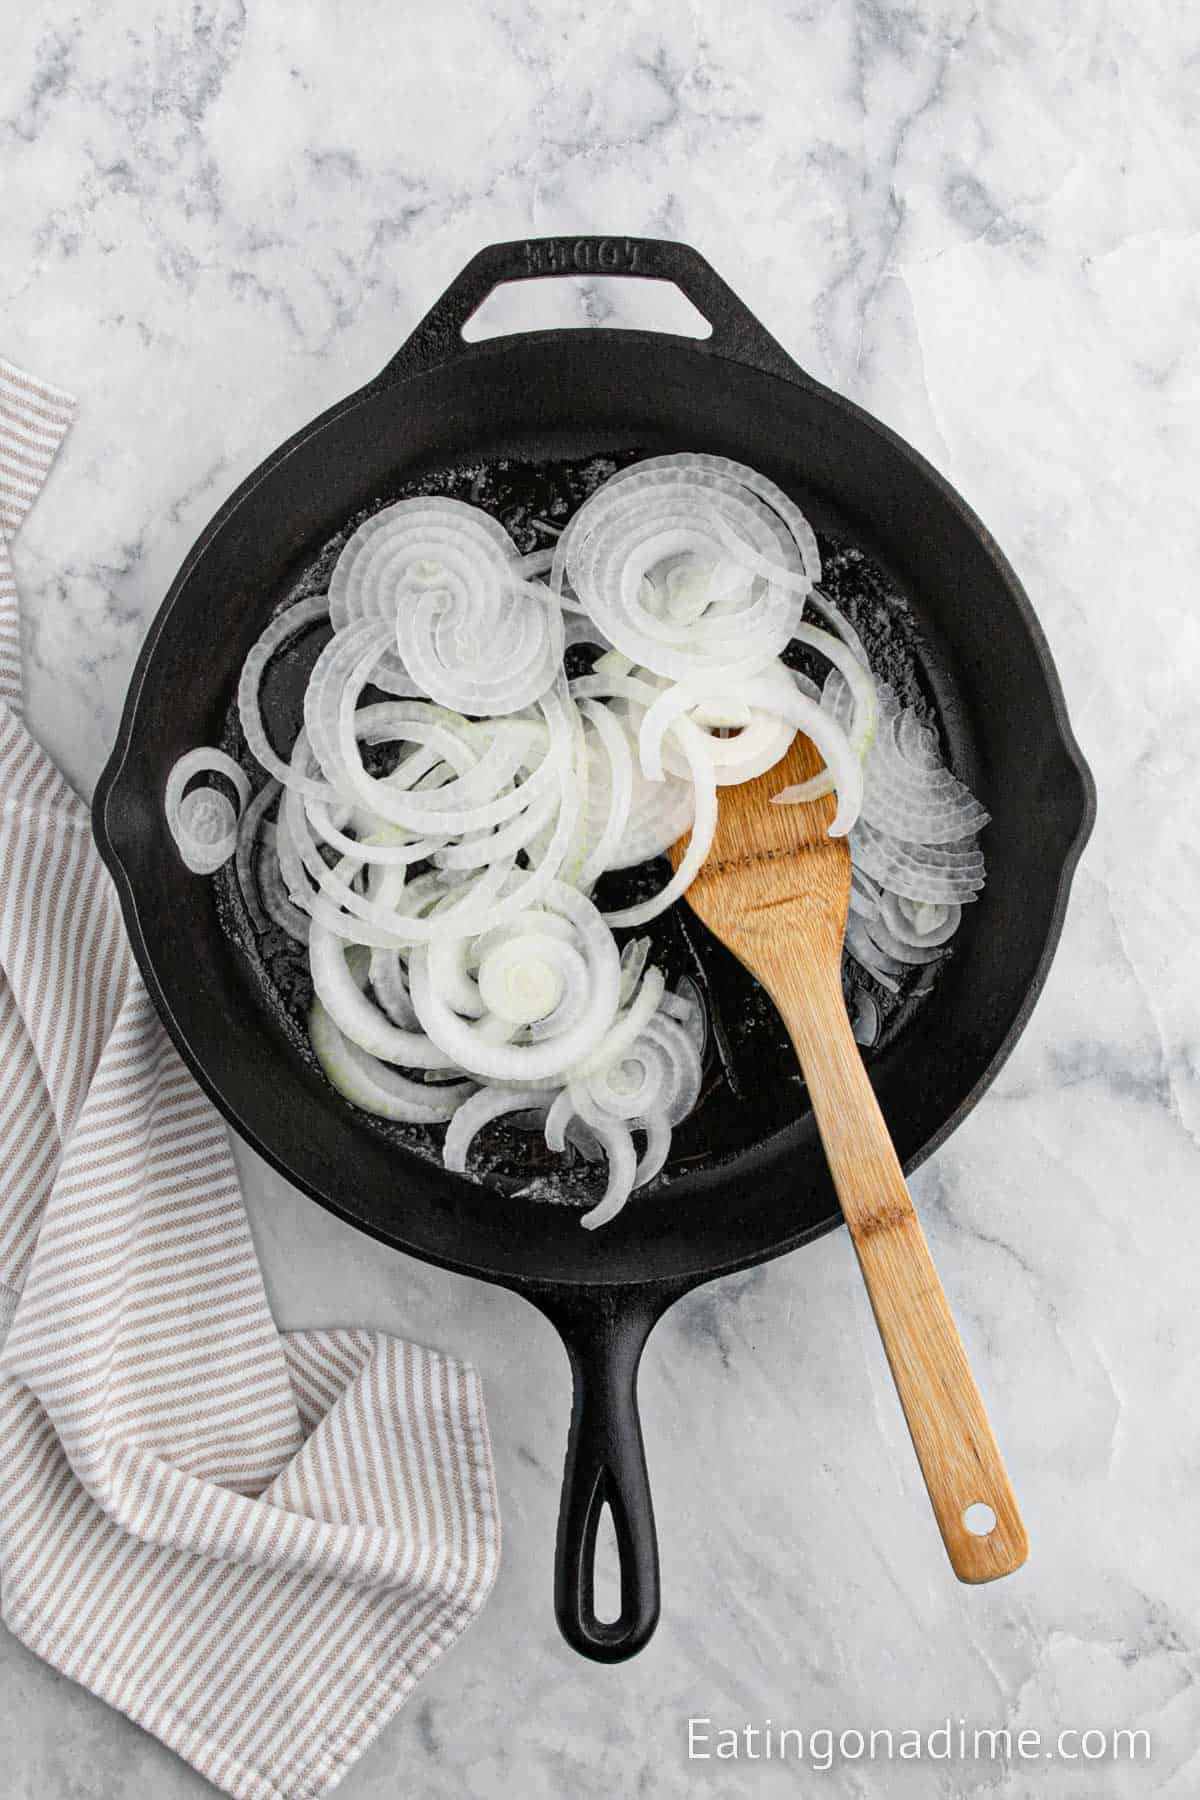 Cooking the slice onions in a cast iron skillet with a wooden spoon